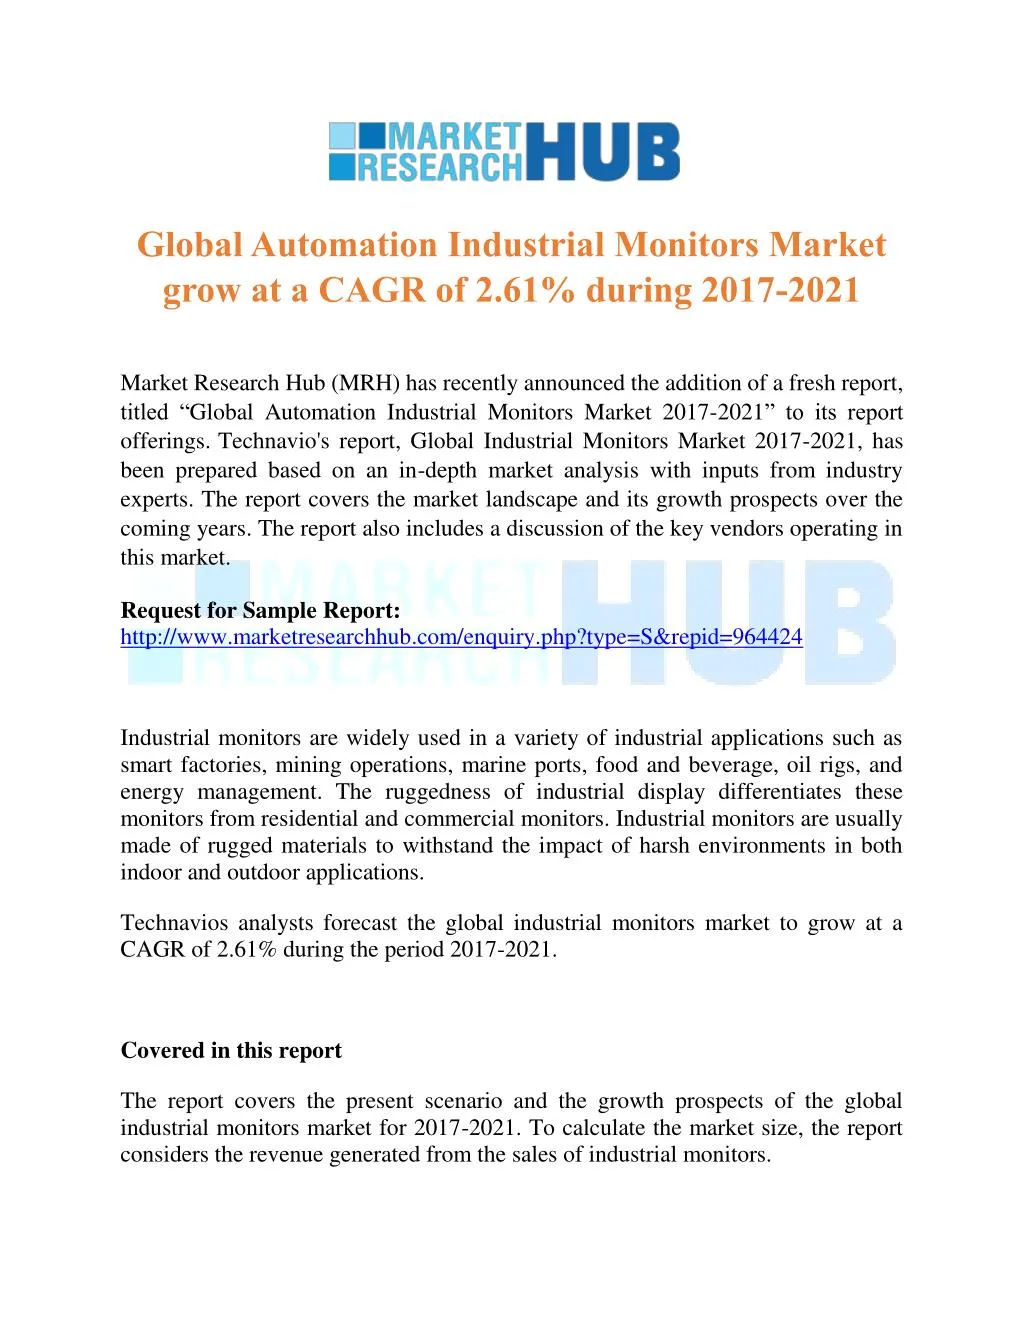 global automation industrial monitors market grow